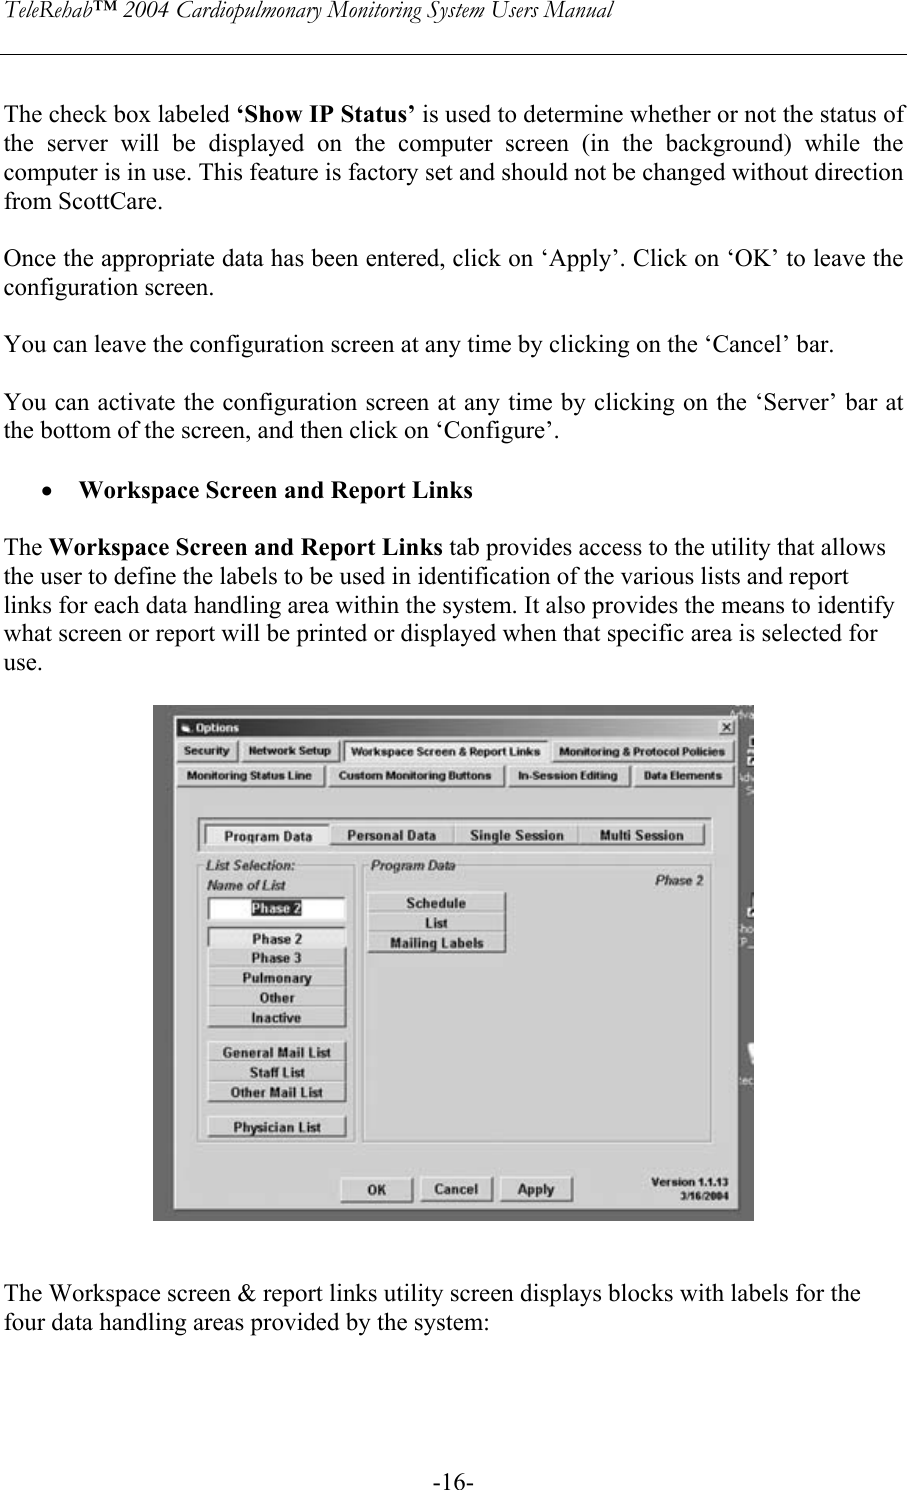 TeleRehab™ 2004 Cardiopulmonary Monitoring System Users Manual    -16- The check box labeled ‘Show IP Status’ is used to determine whether or not the status of the server will be displayed on the computer screen (in the background) while the computer is in use. This feature is factory set and should not be changed without direction from ScottCare.  Once the appropriate data has been entered, click on ‘Apply’. Click on ‘OK’ to leave the configuration screen.    You can leave the configuration screen at any time by clicking on the ‘Cancel’ bar.  You can activate the configuration screen at any time by clicking on the ‘Server’ bar at the bottom of the screen, and then click on ‘Configure’.  • Workspace Screen and Report Links  The Workspace Screen and Report Links tab provides access to the utility that allows the user to define the labels to be used in identification of the various lists and report links for each data handling area within the system. It also provides the means to identify what screen or report will be printed or displayed when that specific area is selected for use.     The Workspace screen &amp; report links utility screen displays blocks with labels for the four data handling areas provided by the system:  